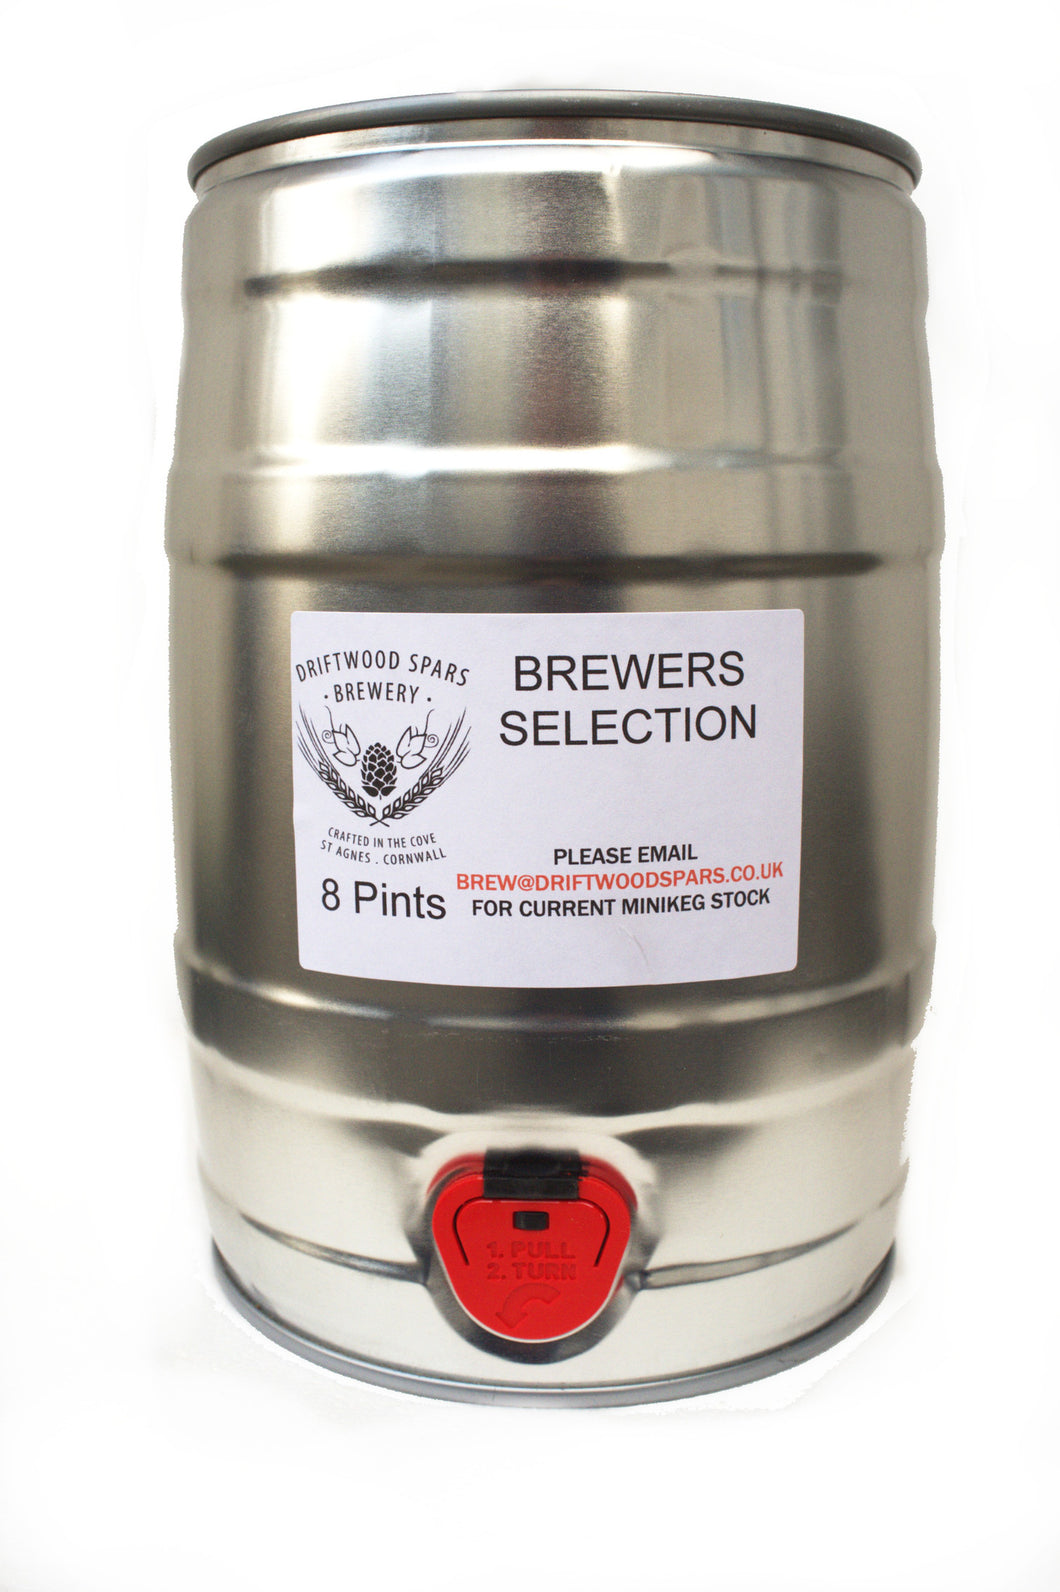 Pete's Mild 5 Litre Minikeg - Cask style beer at home!